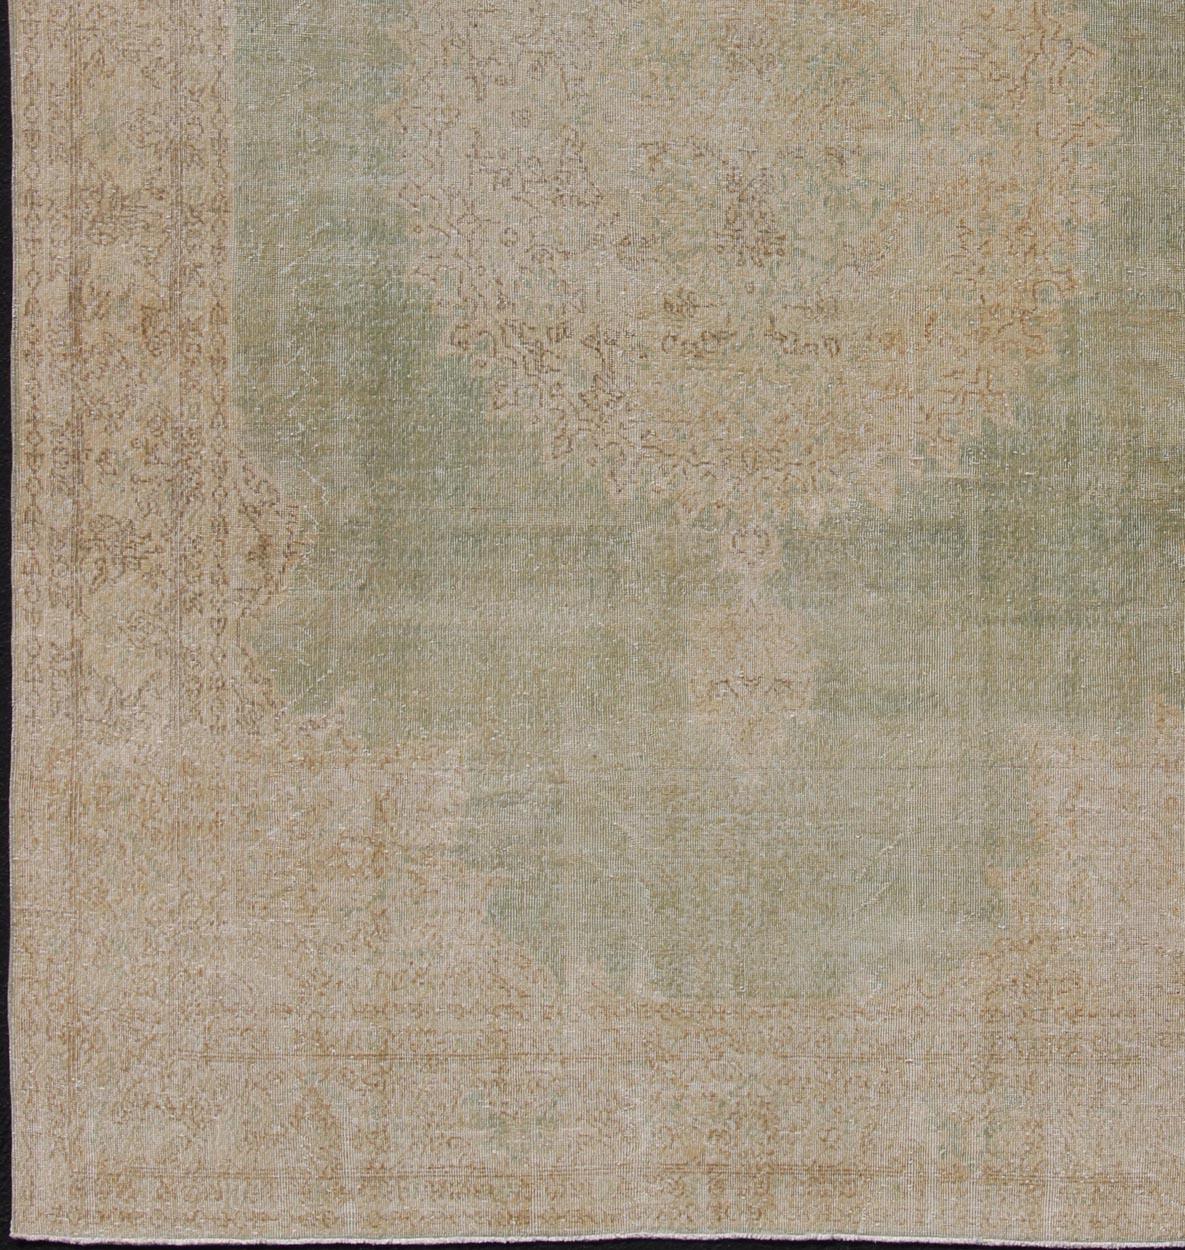 Unique Turkish distressed rug with muted colors in taupe, light green, beige rug en-176863, country of origin / type: Turkey / 1940,

This vintage Turkish carpet has been neutralized to create faded pigments with a floral design. With both Classic